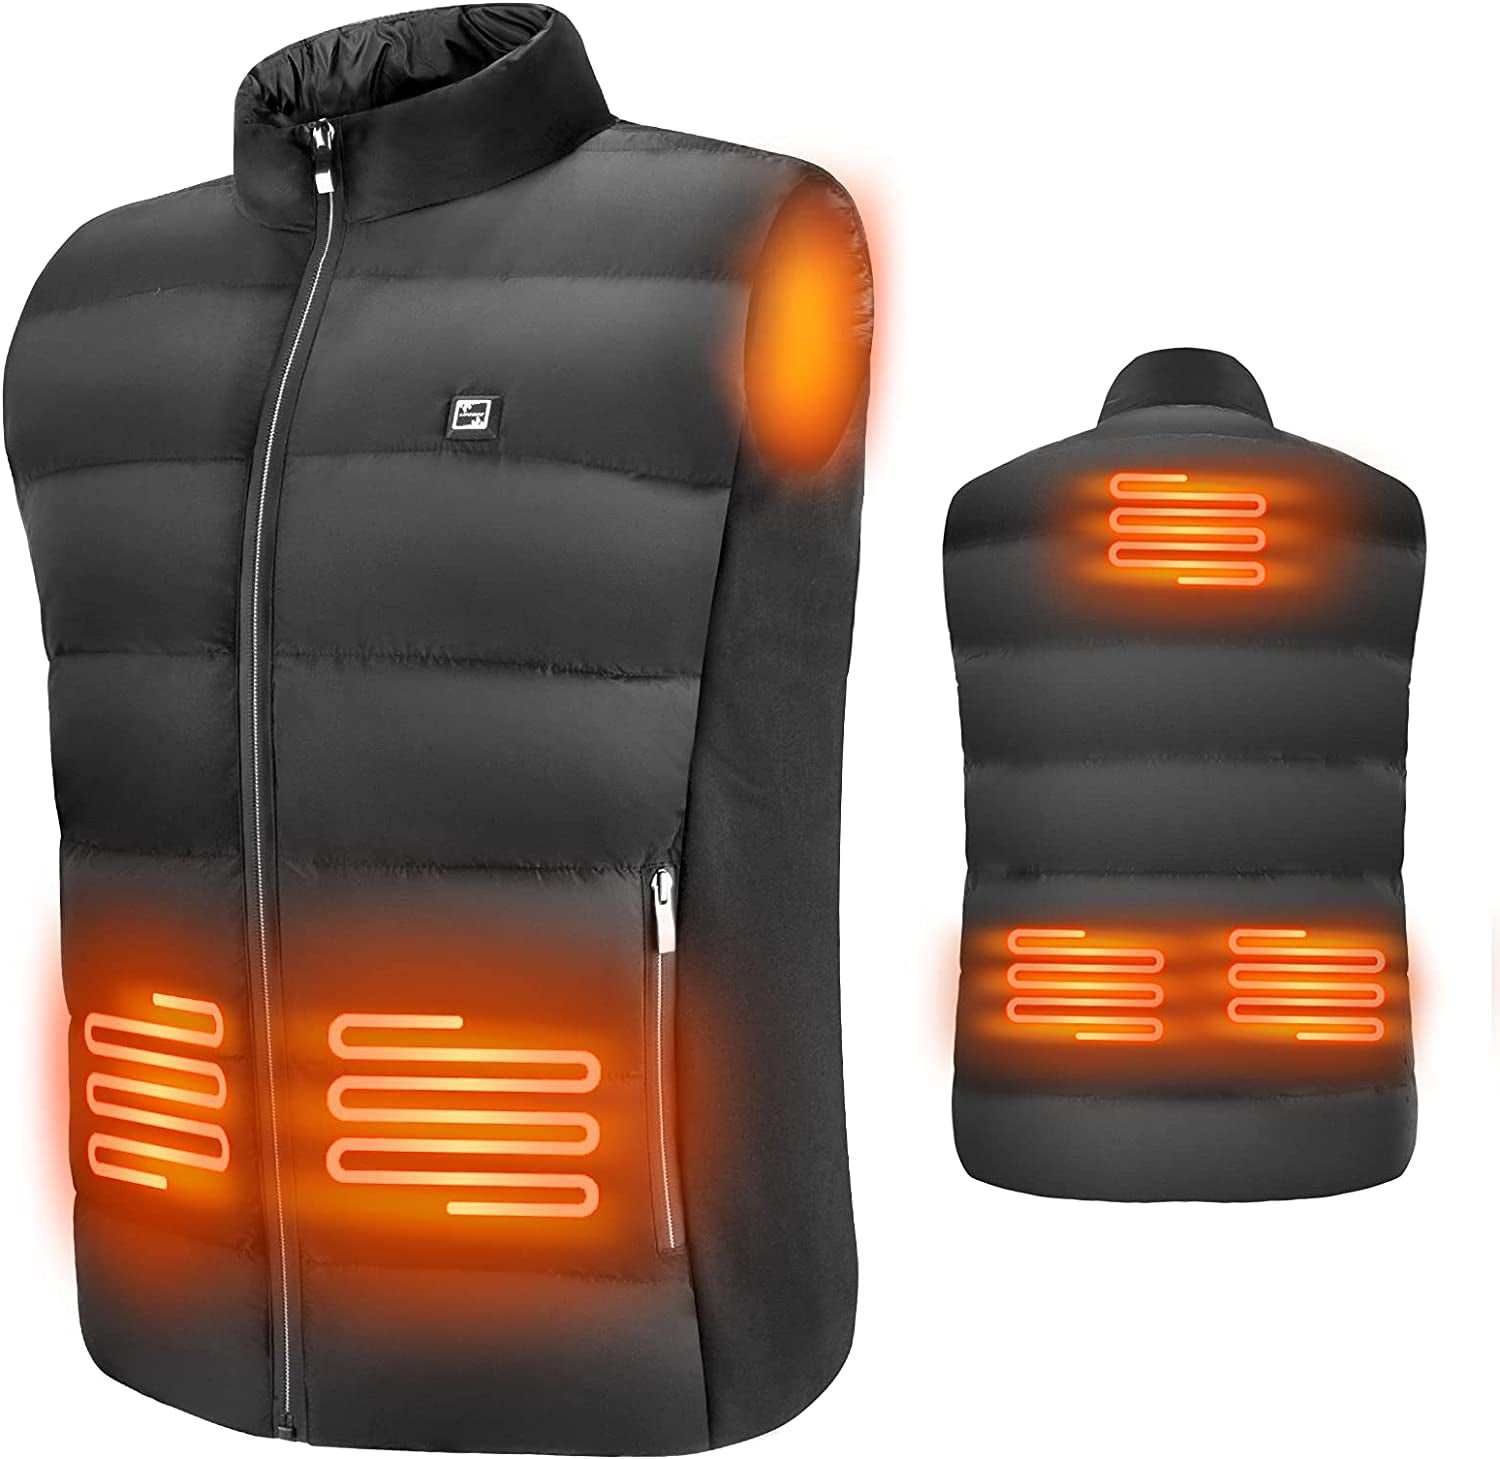 Heated Vest for Men Women USB Charging Electric Heating Coat, Washable Heated Jacket for Skiing Fishing